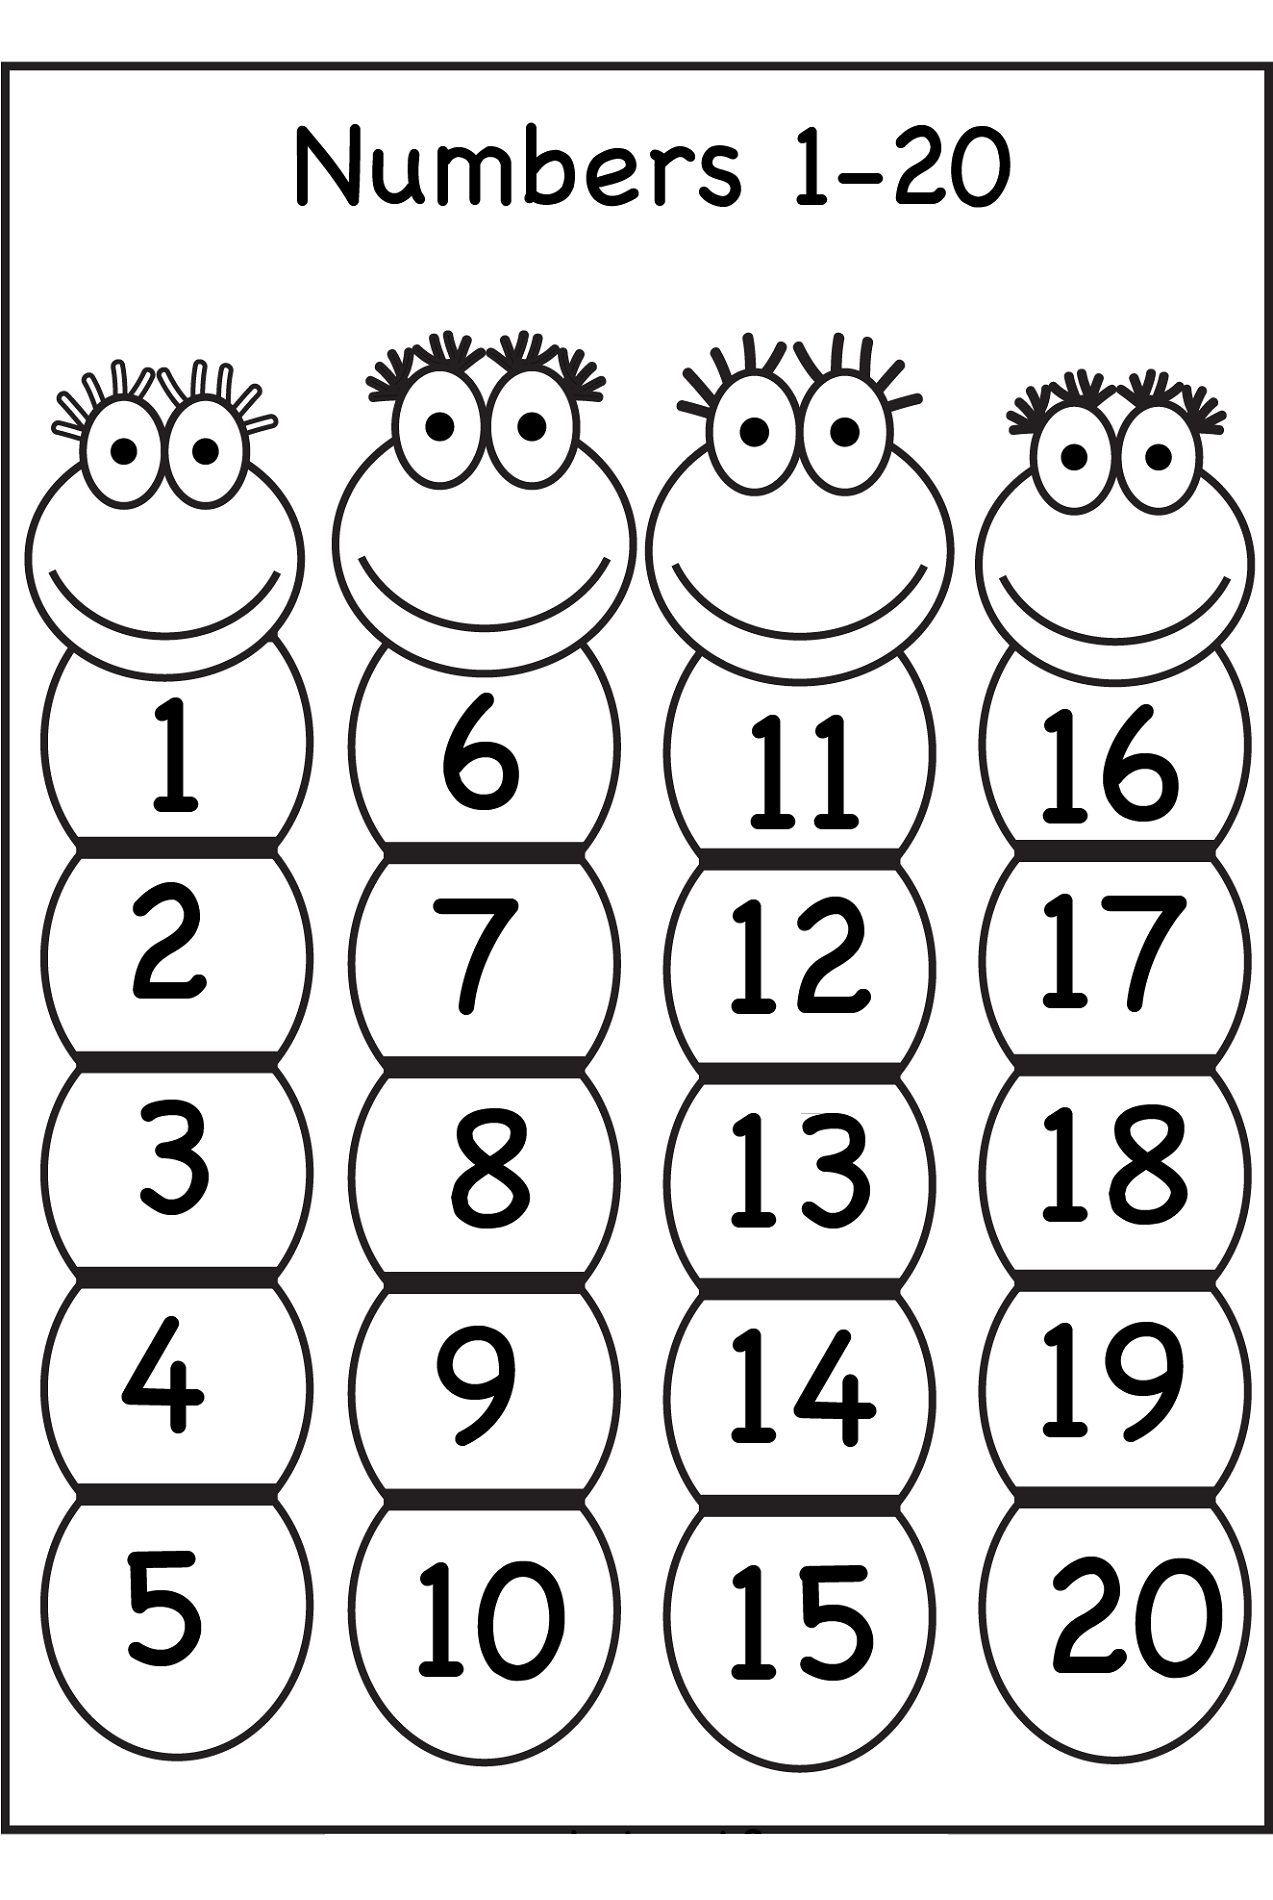 this-is-a-numbers-tracing-worksheet-for-preschoolers-or-printable